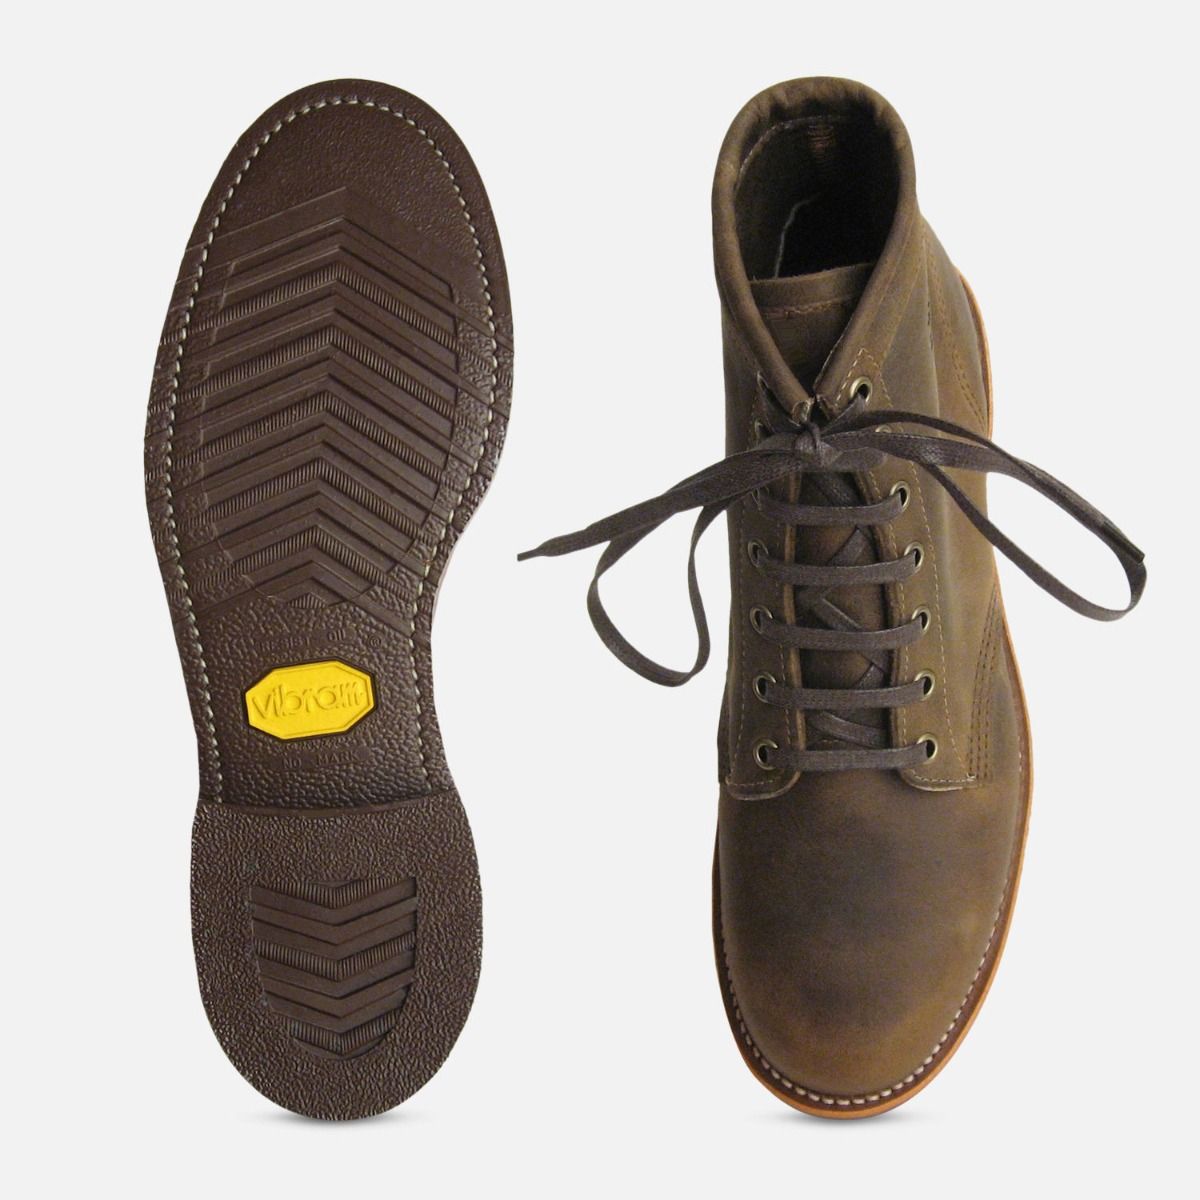 shoes with vibram